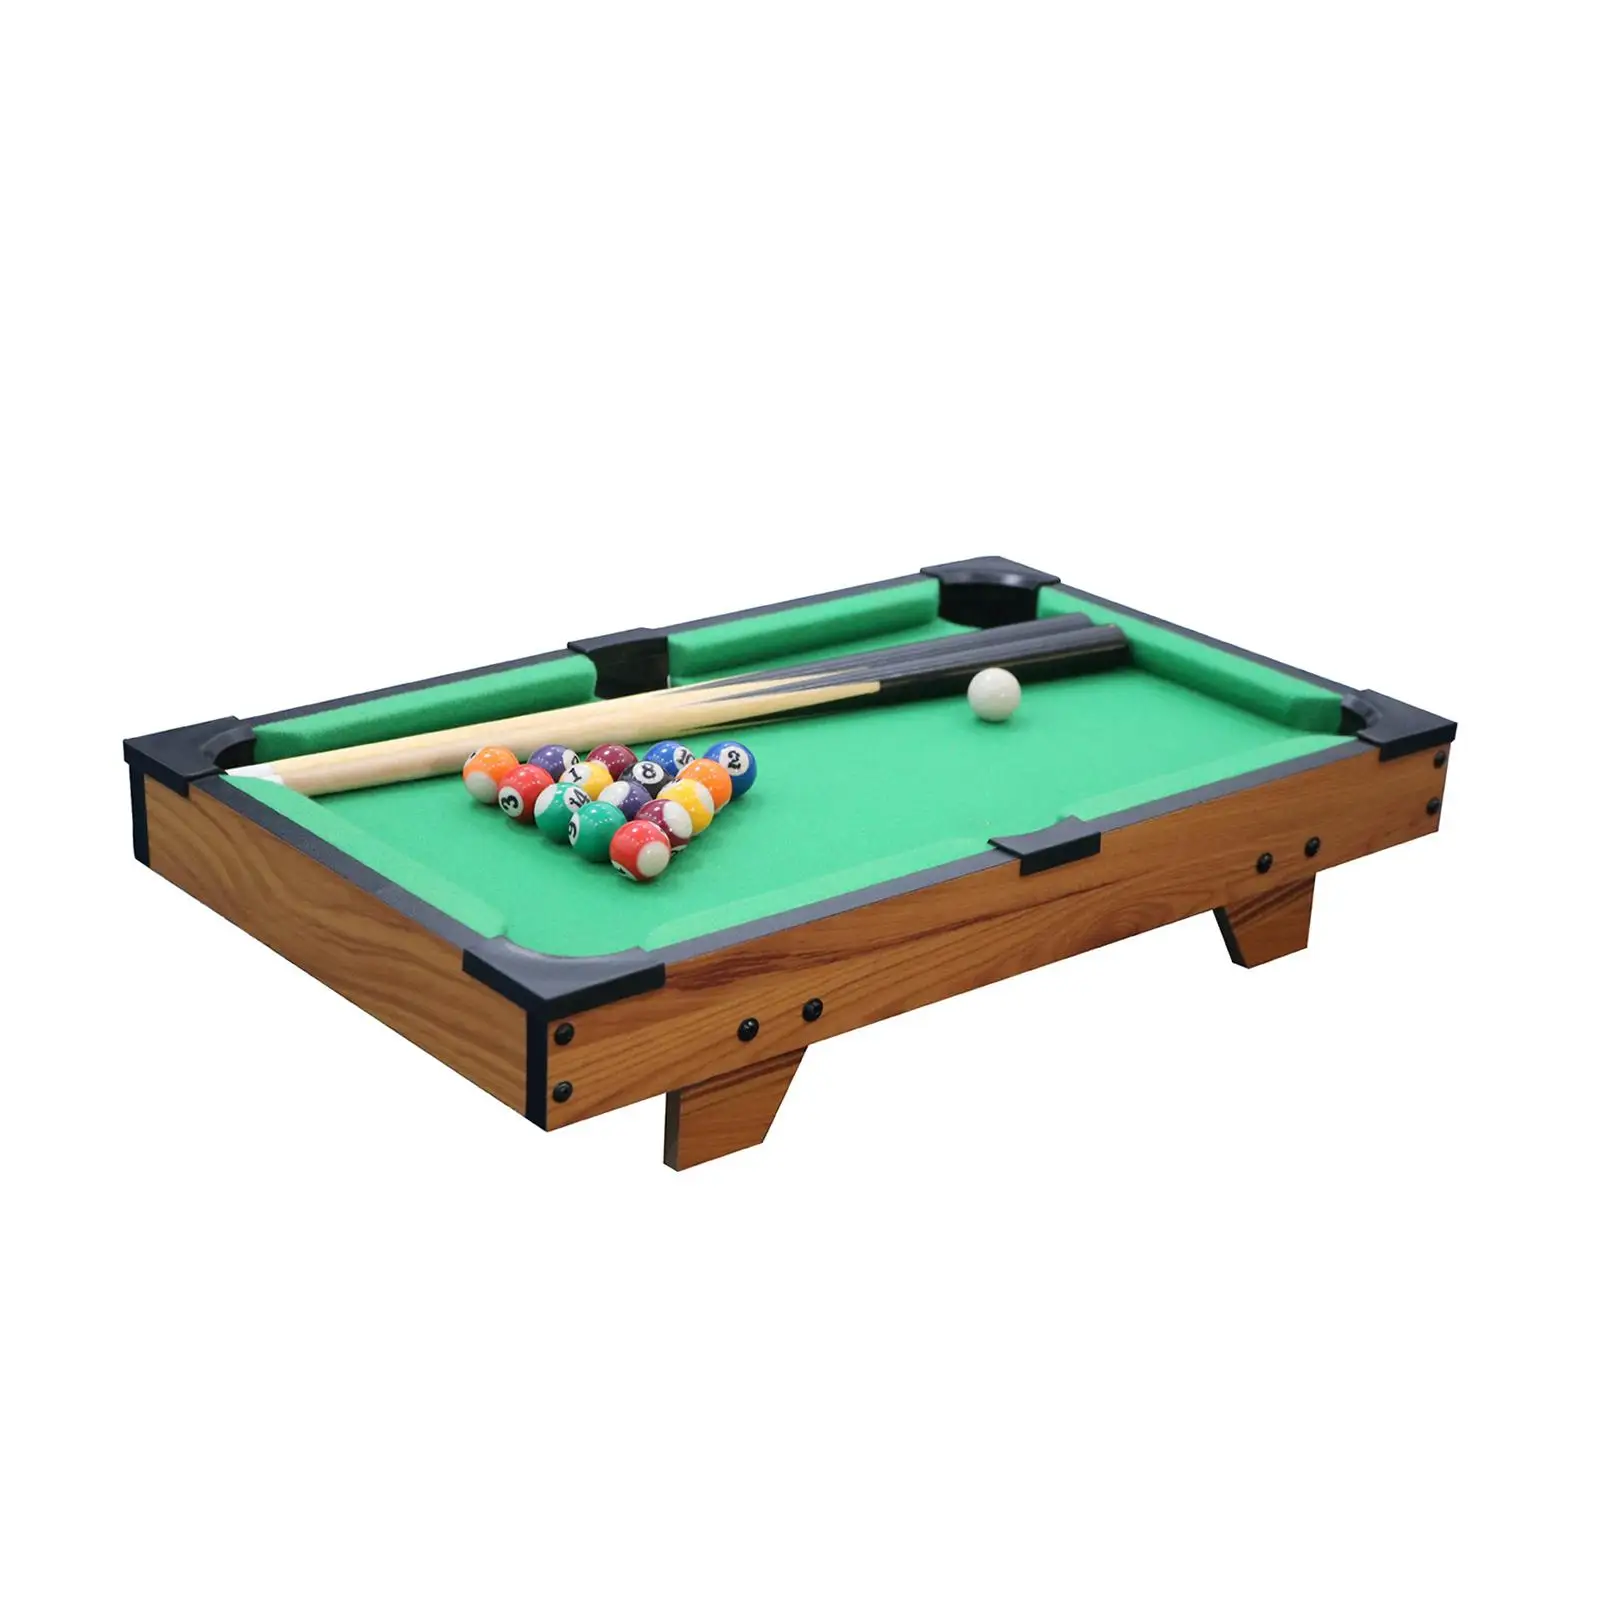 Mini Table pool Colorful Balls Educational with 2 Sticks Felt Surface Game